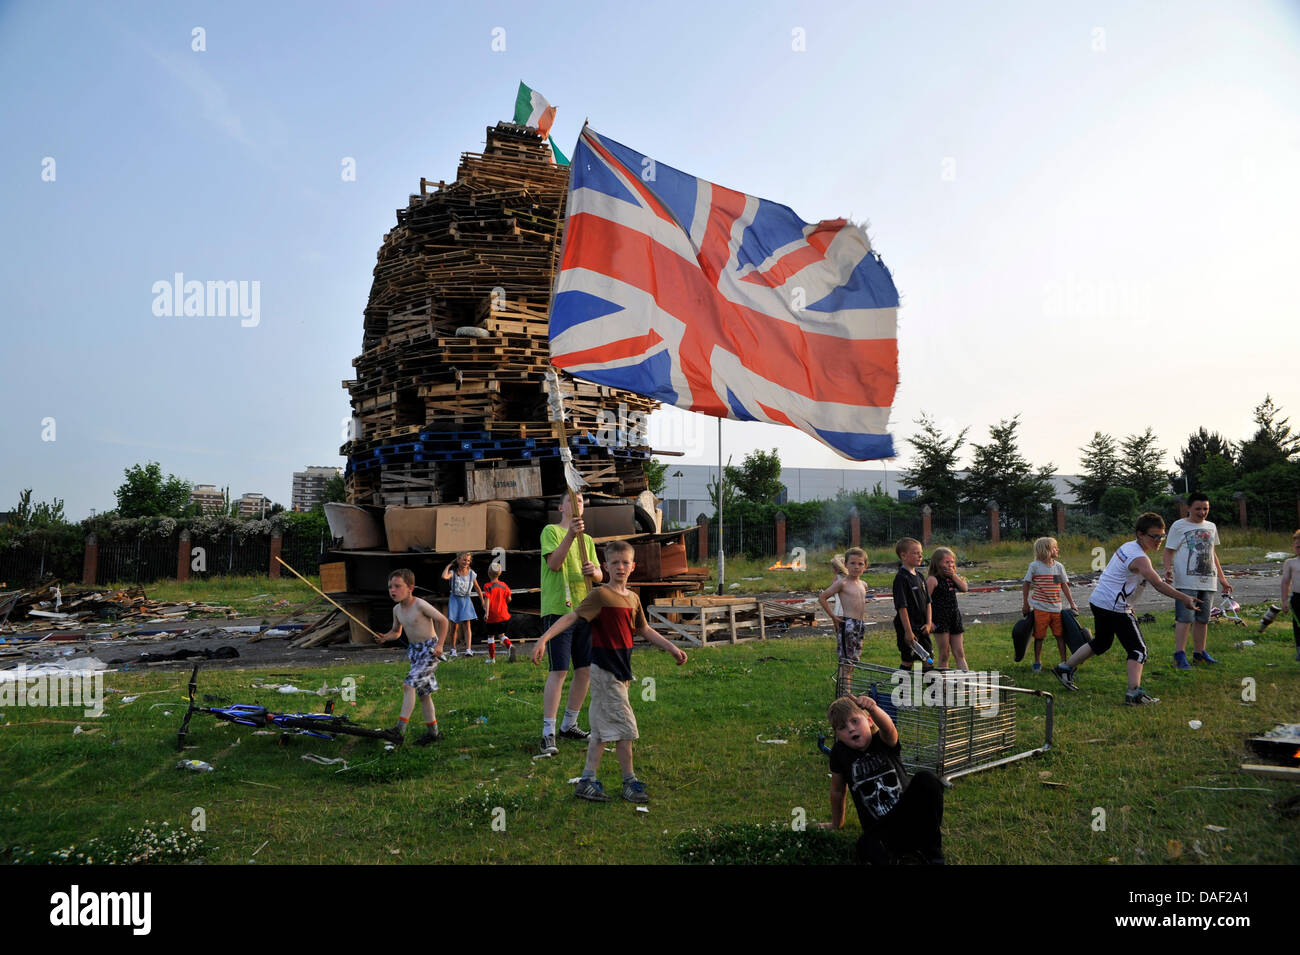 Belfast, Northern Ireland. 11th July, 2013. On July 11, 'Eleventh Night' bonfires are lit in staunchly Protestant areas. Many are massive constructions of wooden pallettes, old sofas and rubber tyres topped with Irish flags or effigies of pro-Nationalist figures. Bonfire architects battle it out to see who can build the biggest, and shifts of young guardians ensure rival builders don't steal their burnable booty. At midnight the bonfires are set alight, and these raging infernos can be seen blazing across the city. Pictured:  Falls Road and The Shankhill Credit:  andrew chittock/Alamy Live New Stock Photo